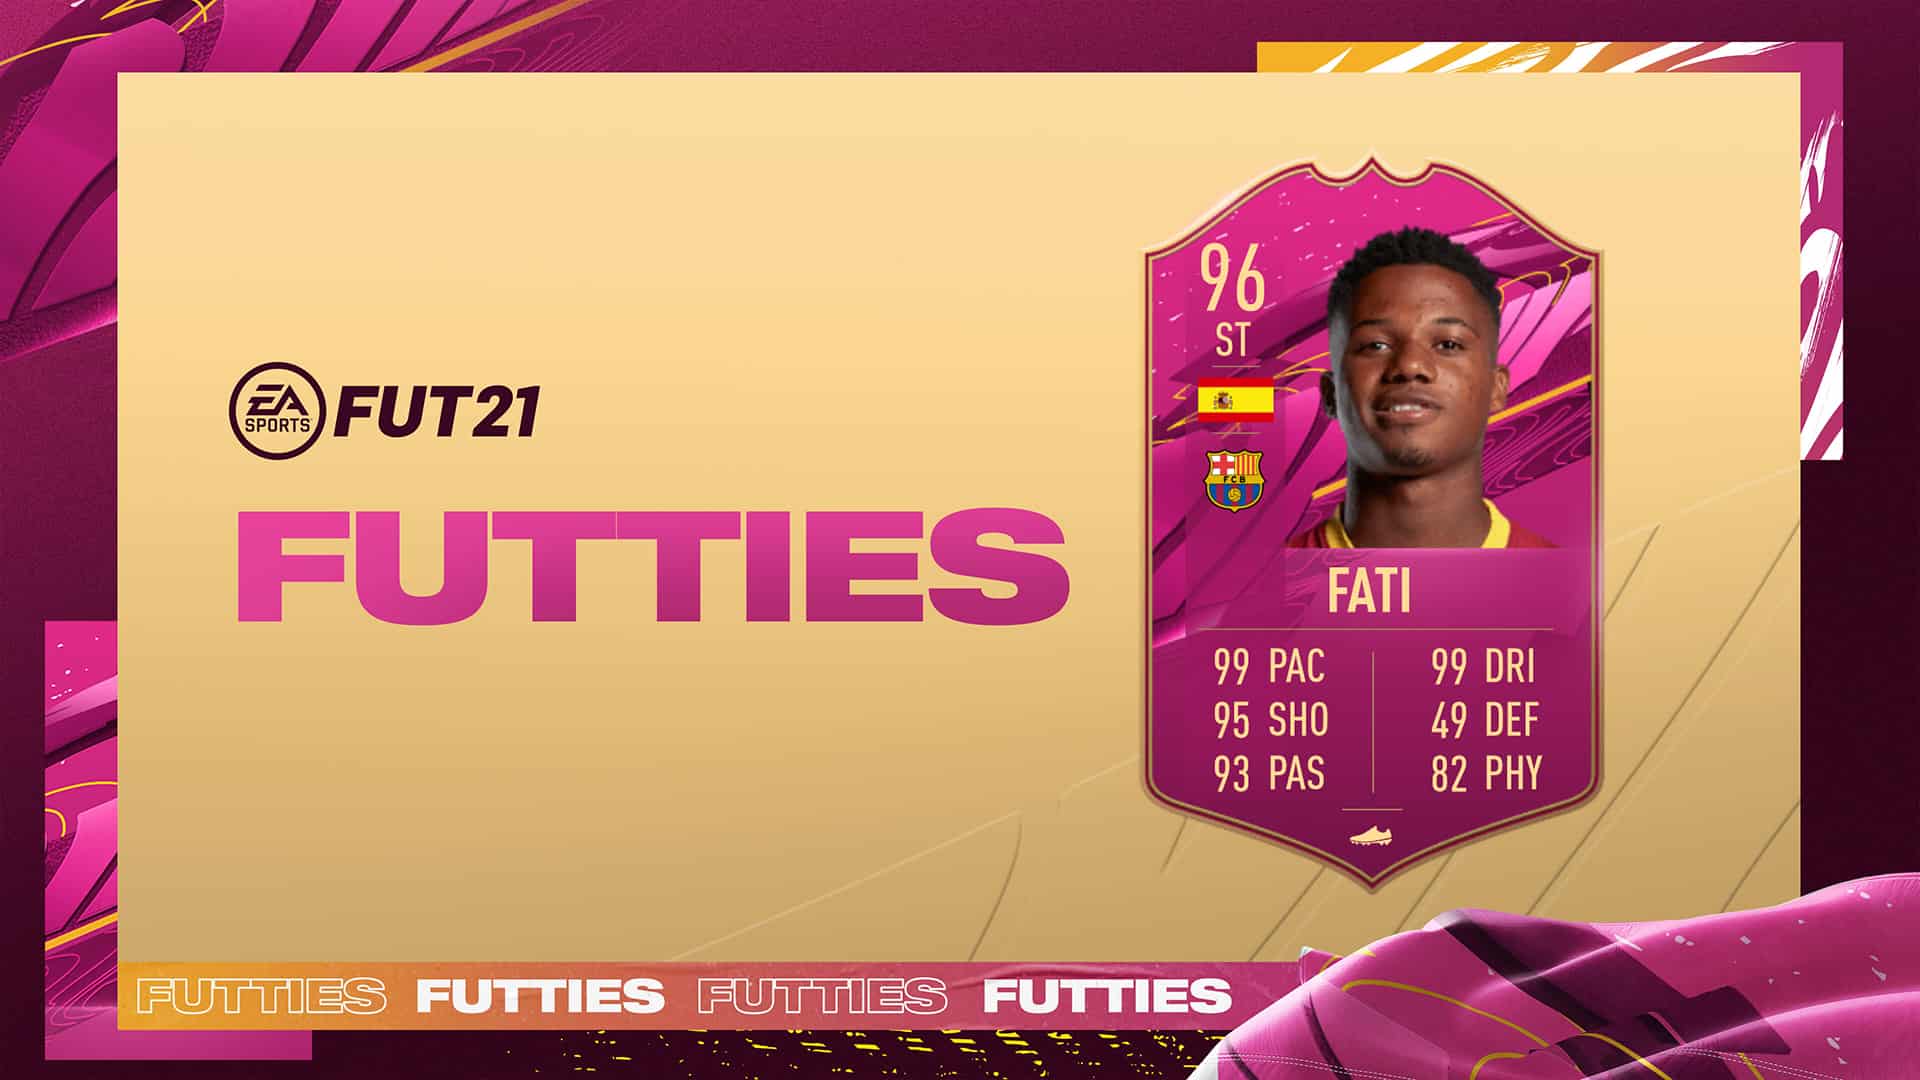 Fifa 21 Ansu Fati Futties In Objectives How To Complete Requirements Fifaultimateteam It Uk